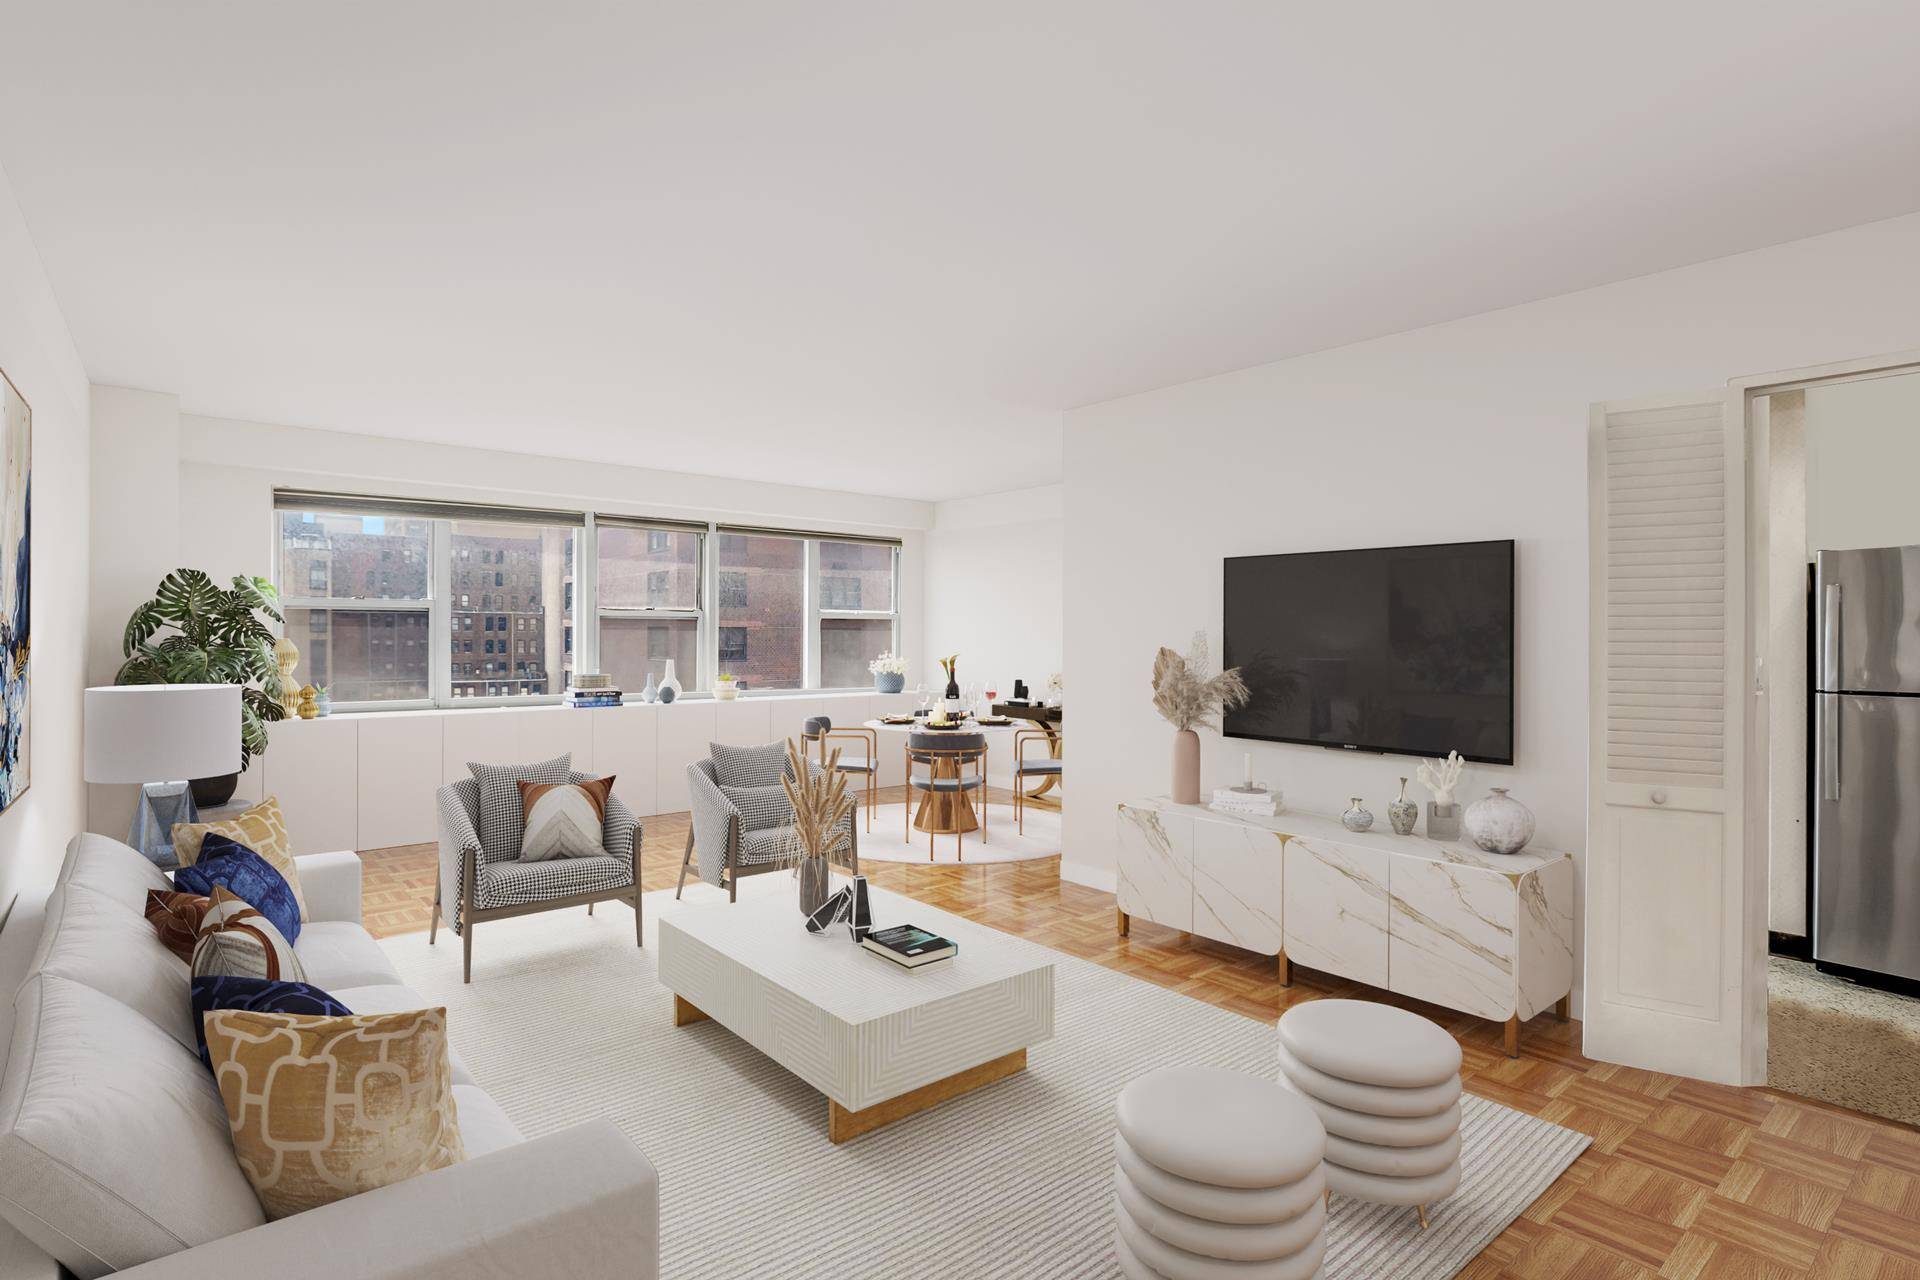 CONDO Convertible 2 bedroom apartment in one of the most sort after buildings in Murray Hill.